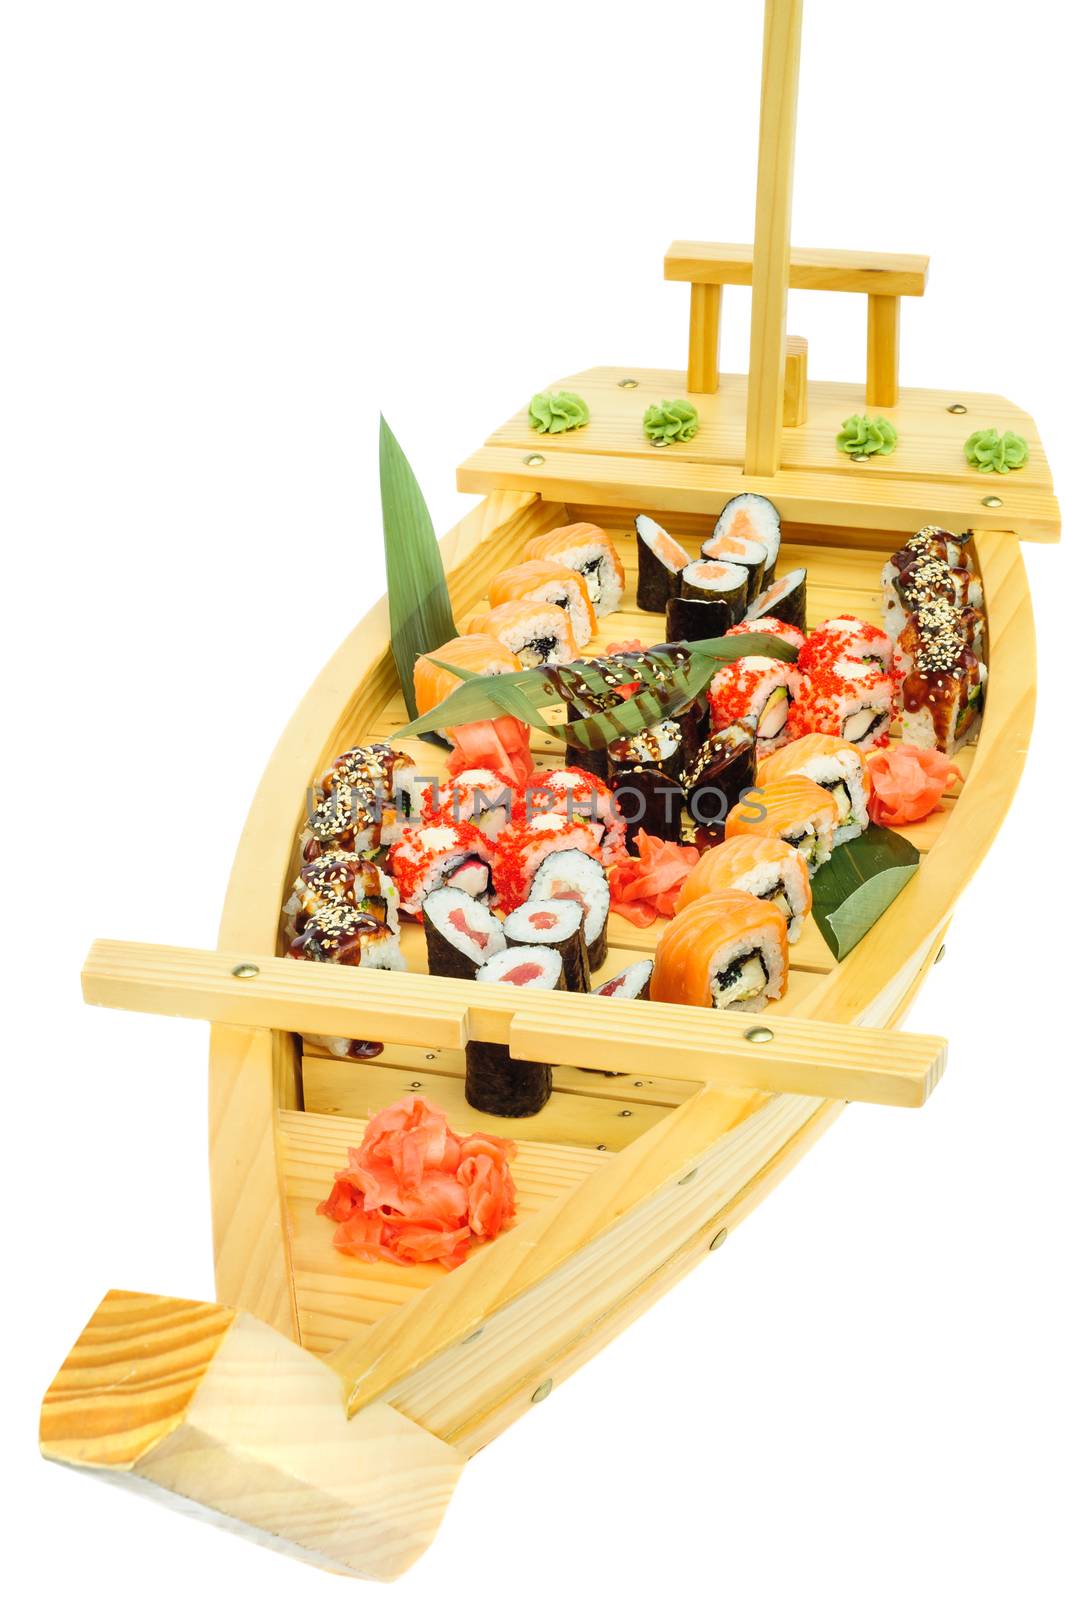 Sushi set of rolls on ship shaped plate by starush